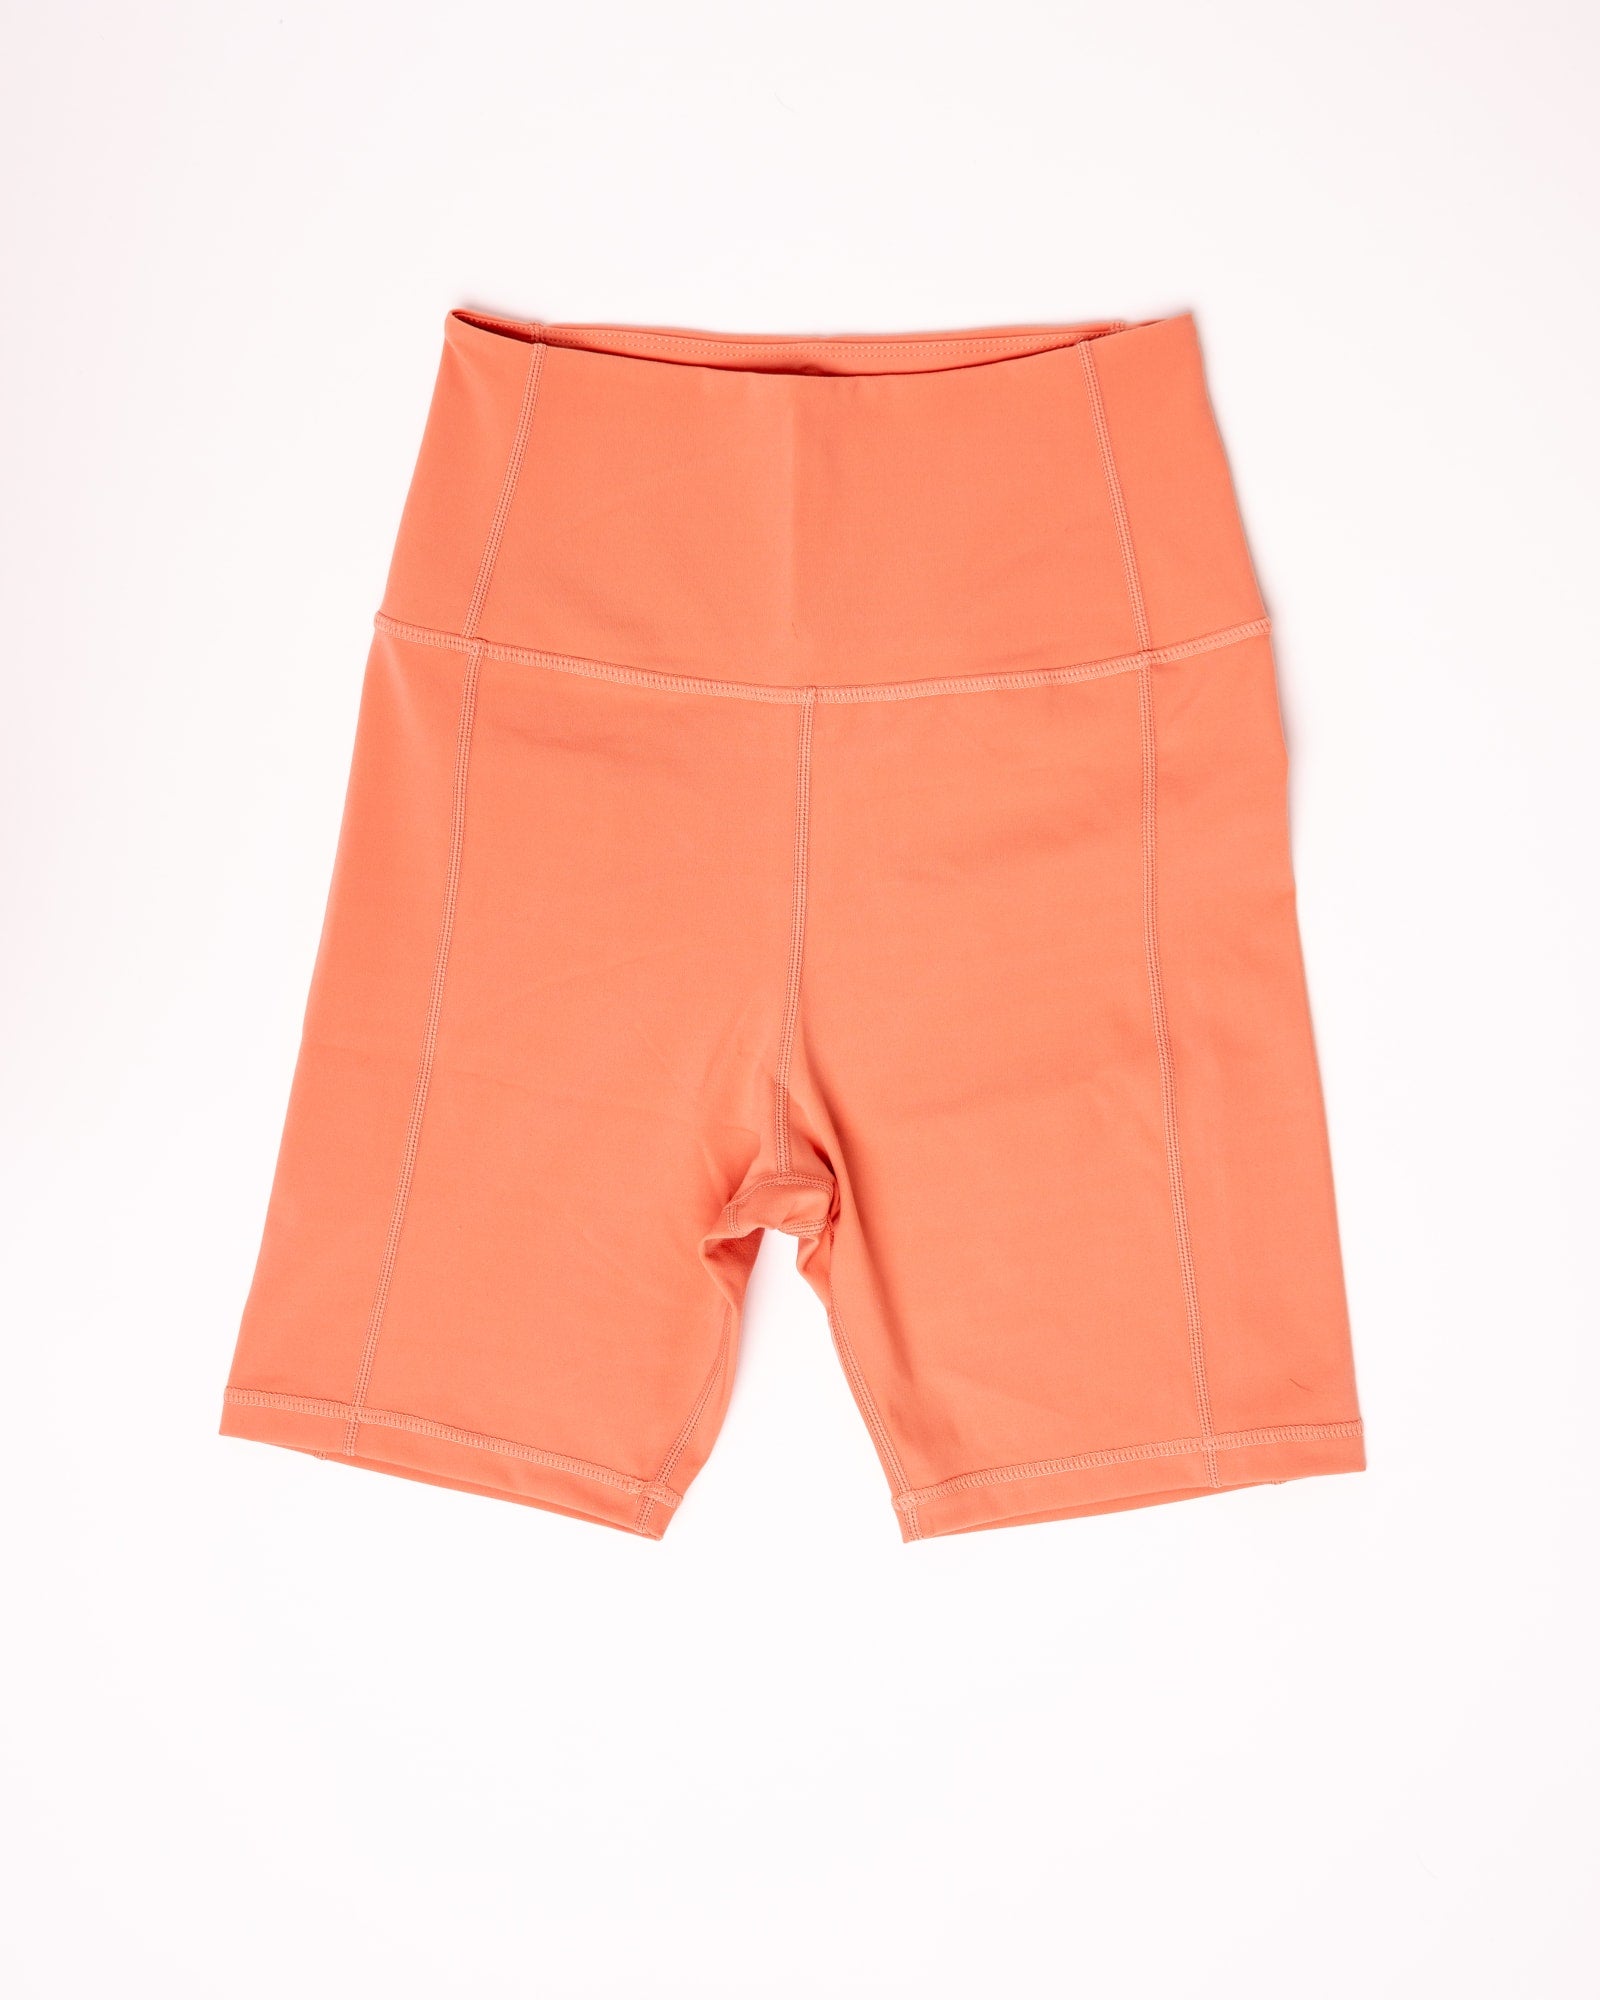 Best Shorts for Apple Shape Summer 2023 - Neutrally Polished